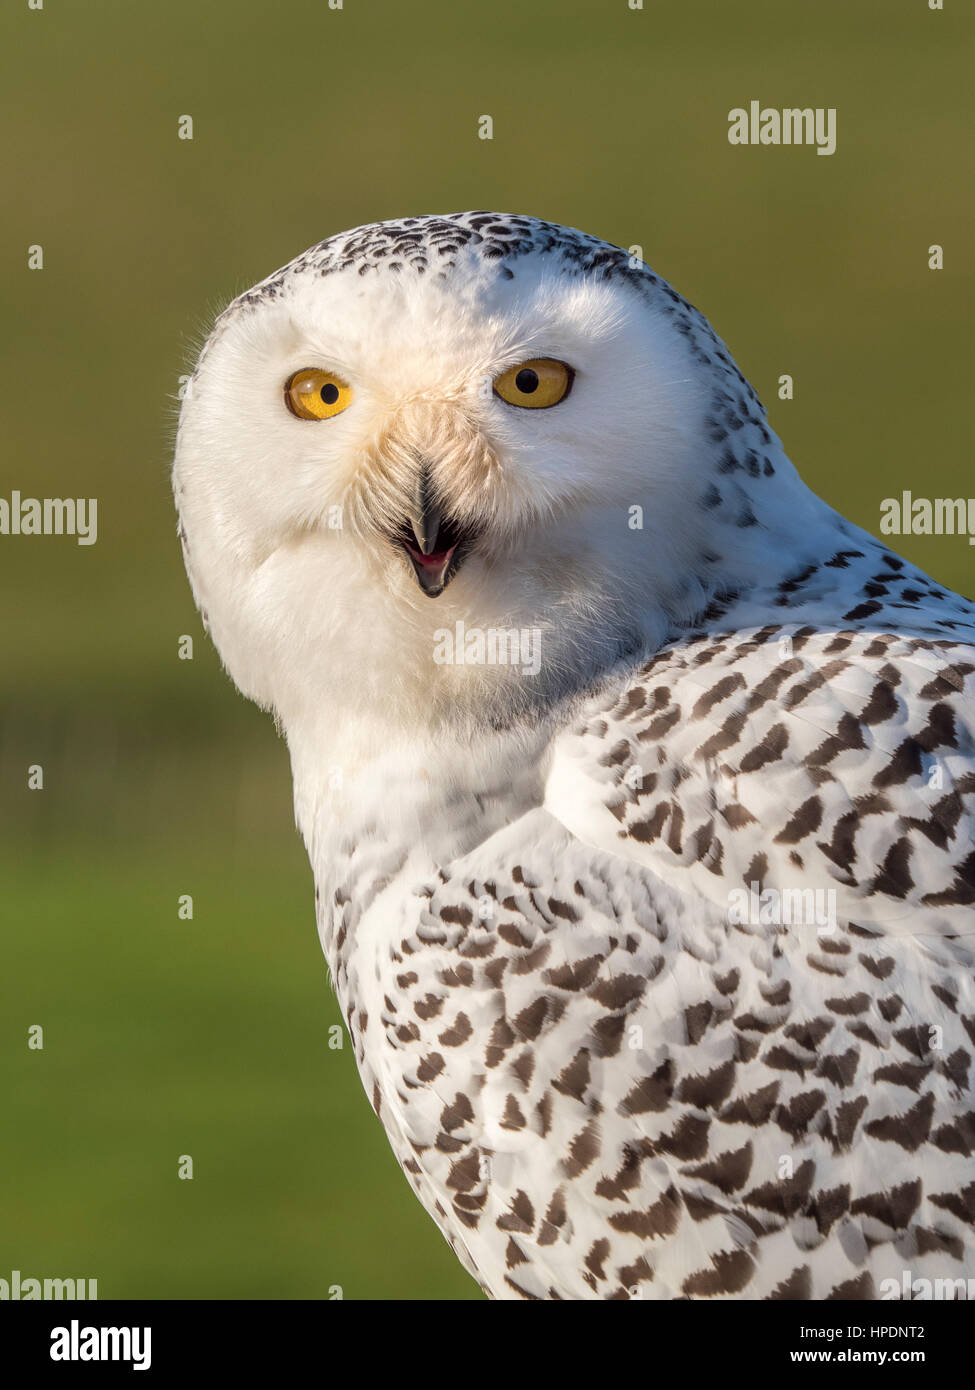 Close up of Snowy Owl Banque D'Images